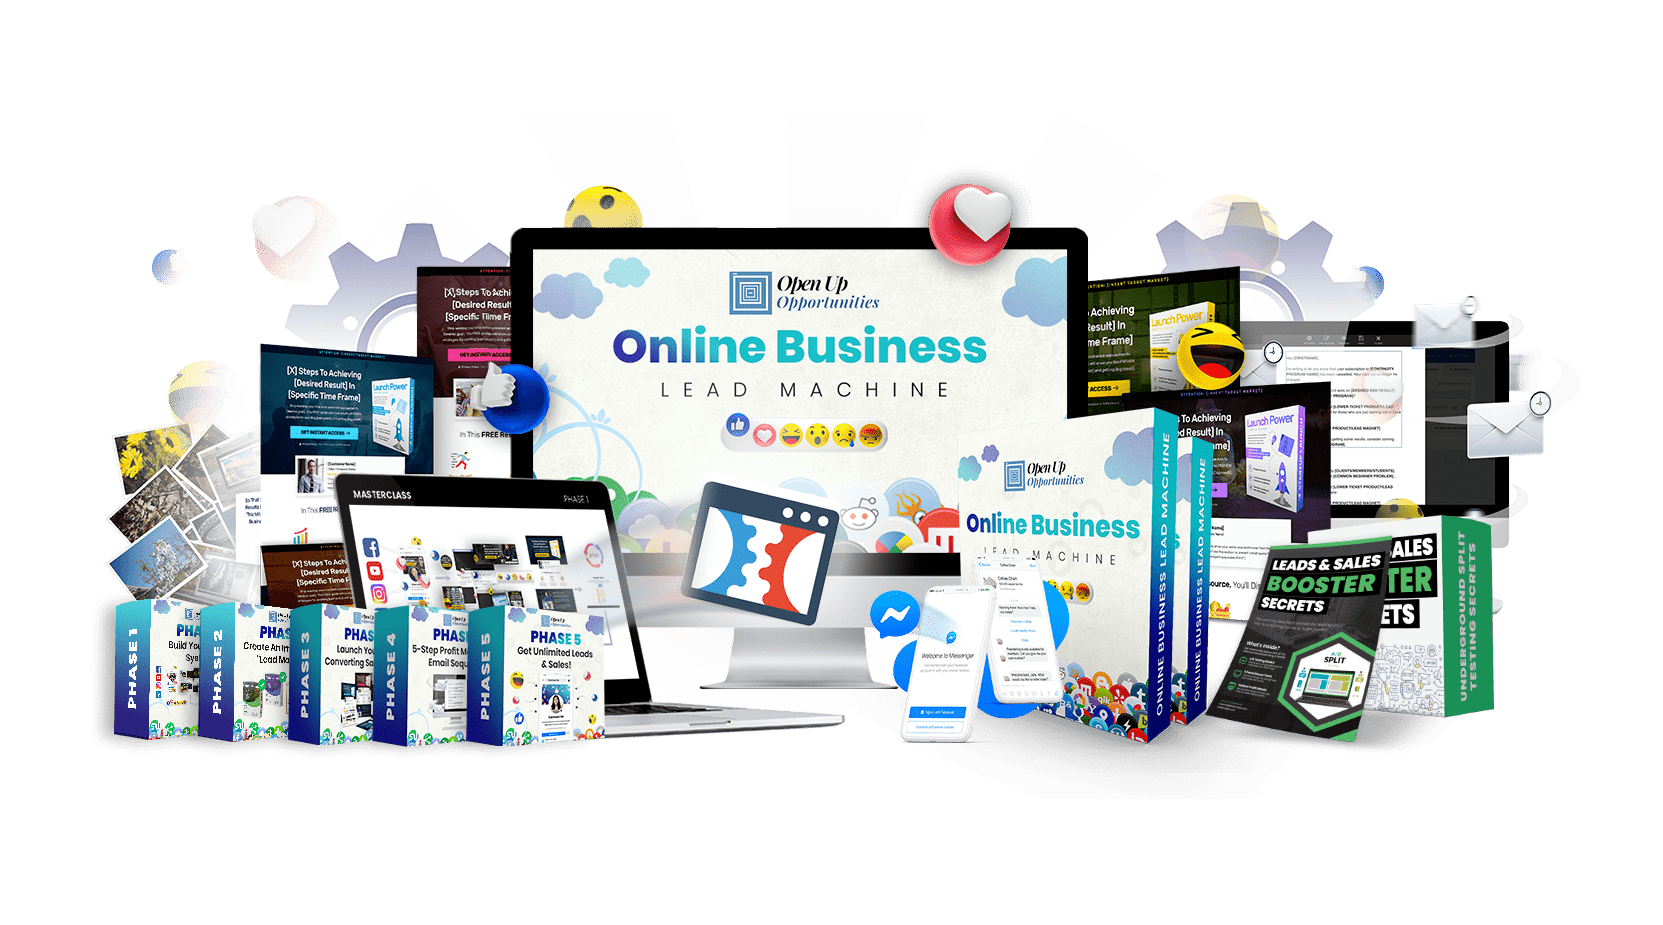 Online Business Lead Machine - openup-opportunities.com